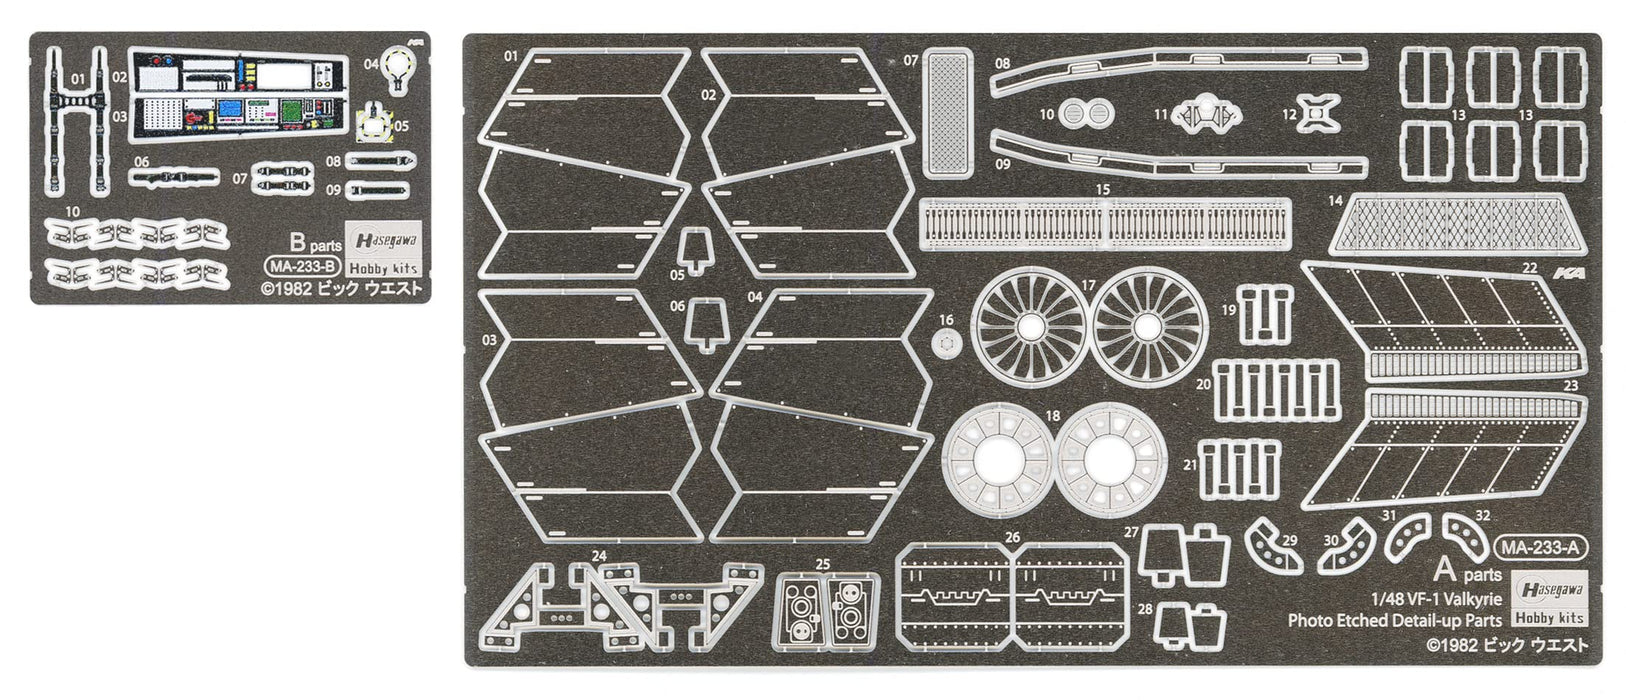 Hasegawa 1/48 Scale VF-1 Valkyrie Etched Parts - Super Dimension Macross Model 65793